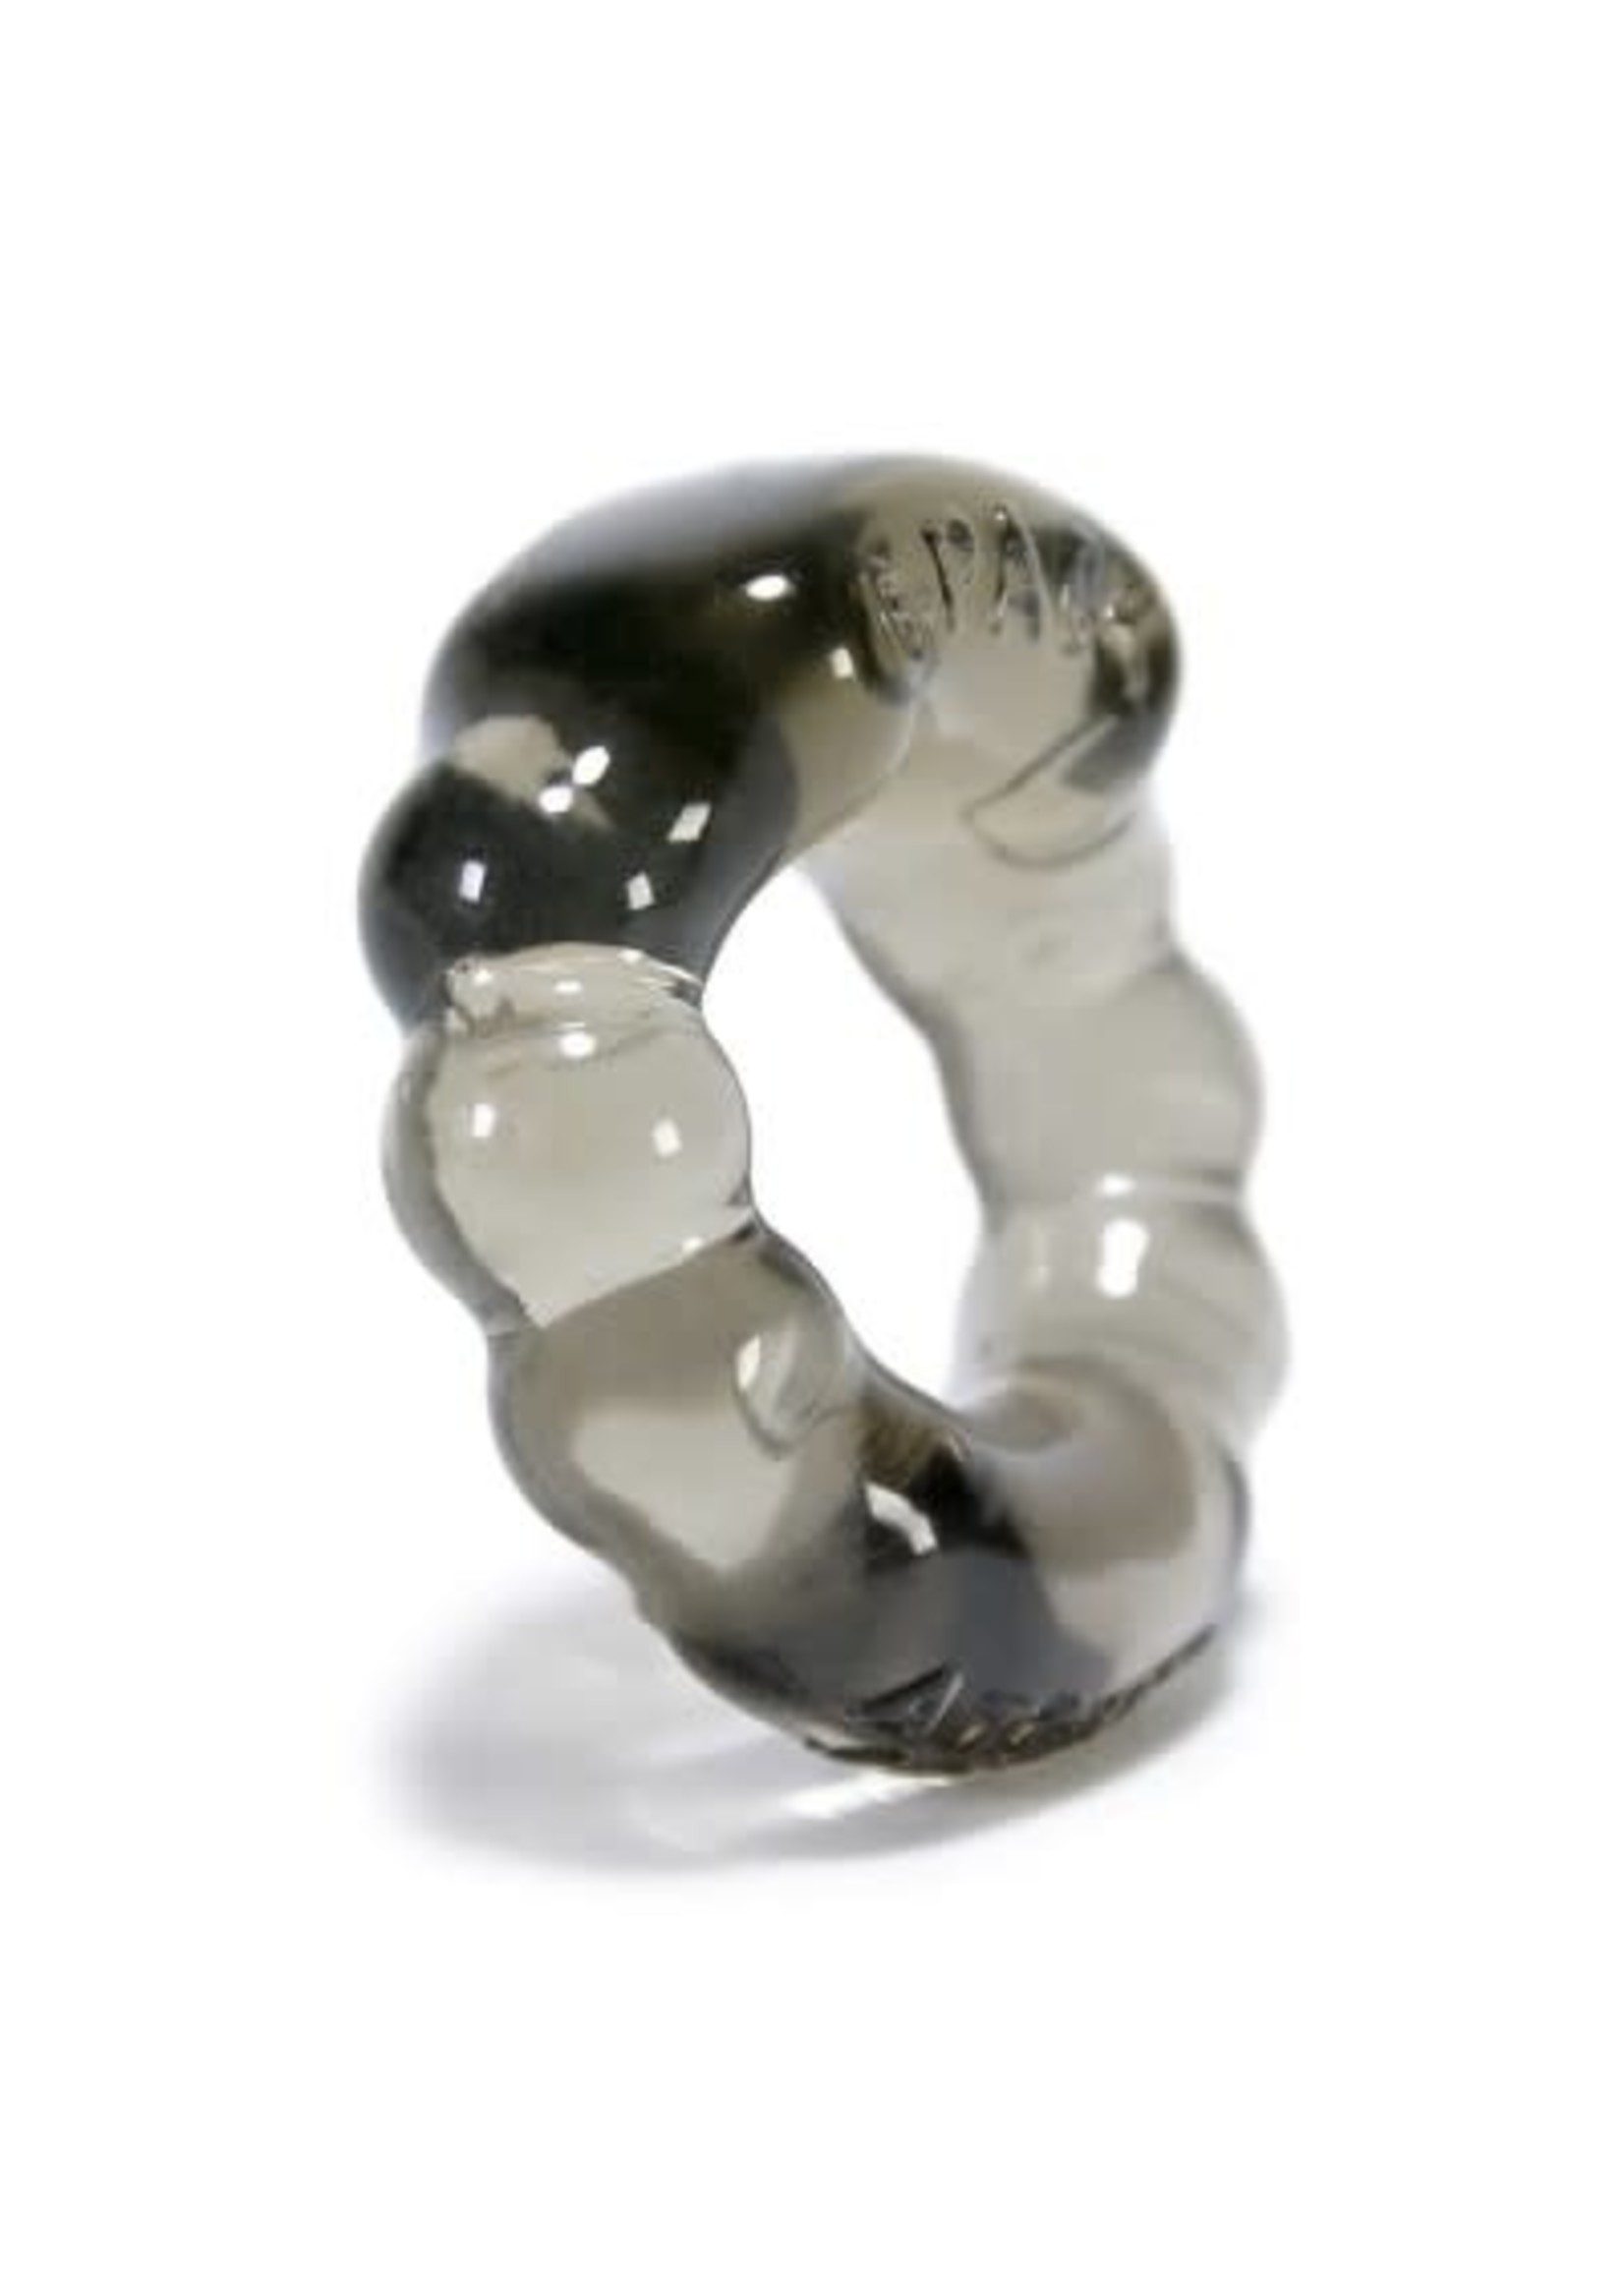 OX Balls Oxballs 6-Pack Cock ring